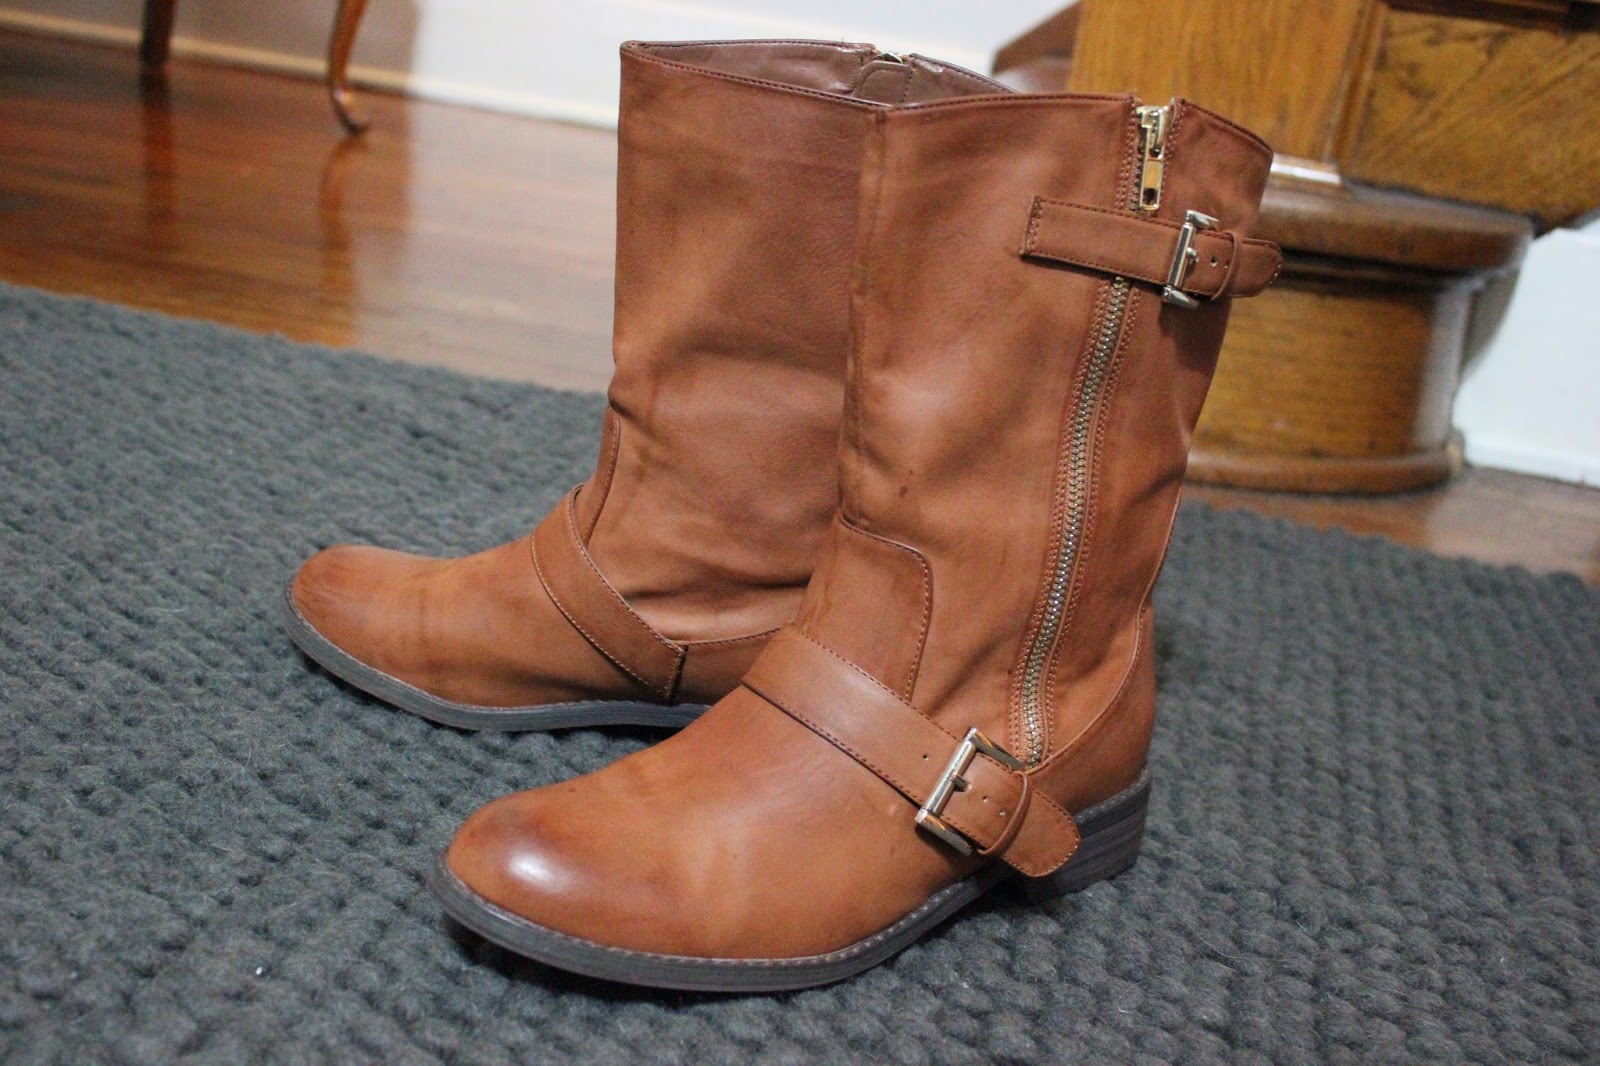 Katie in Kansas: How cute are these boots? How cute are these boots?